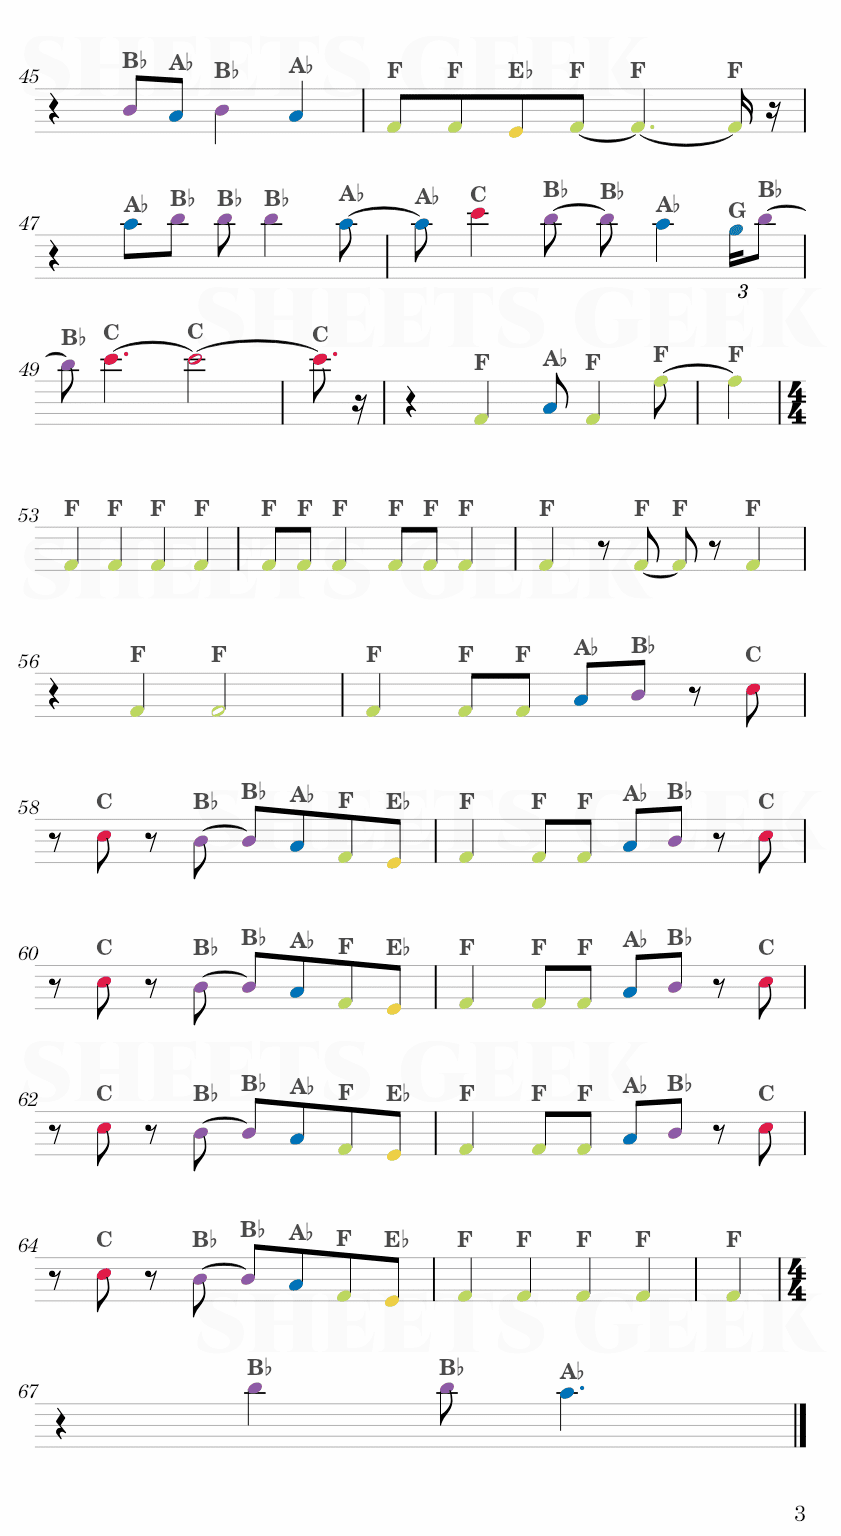 Teen Titans Intro Theme Easy Sheet Music Free for piano, keyboard, flute, violin, sax, cello page 3